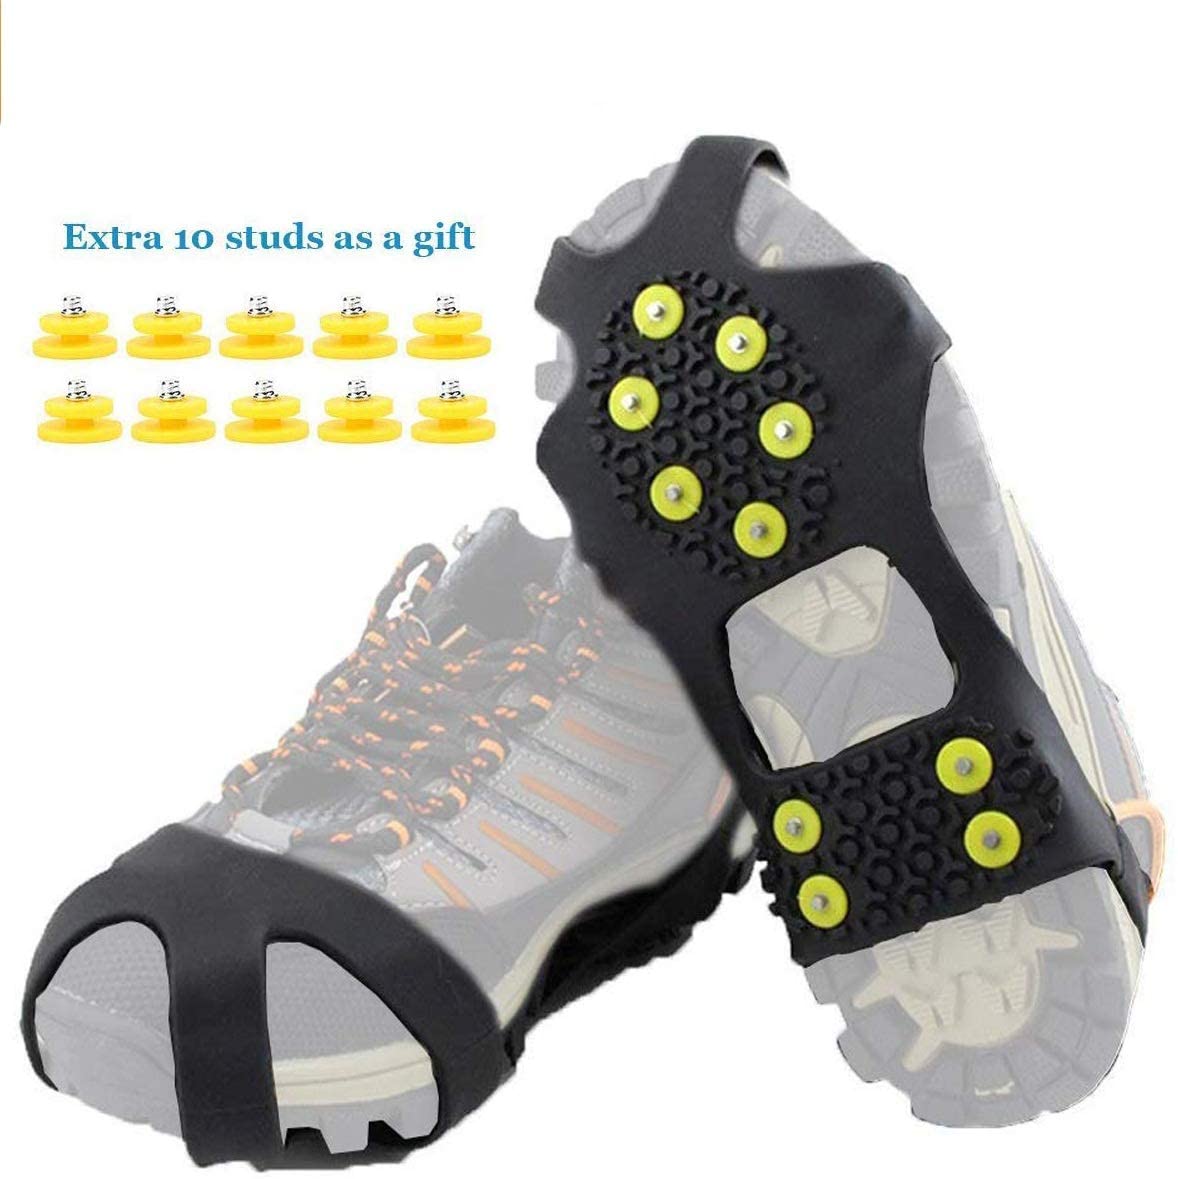 Crampons Ice Cleats for Winter Boots Shoes 10 Spikes Anti Slip Ice Grippers Snow Grips Walk Traction Crampon Slip-on Stretch Footwear for Women Men Kids